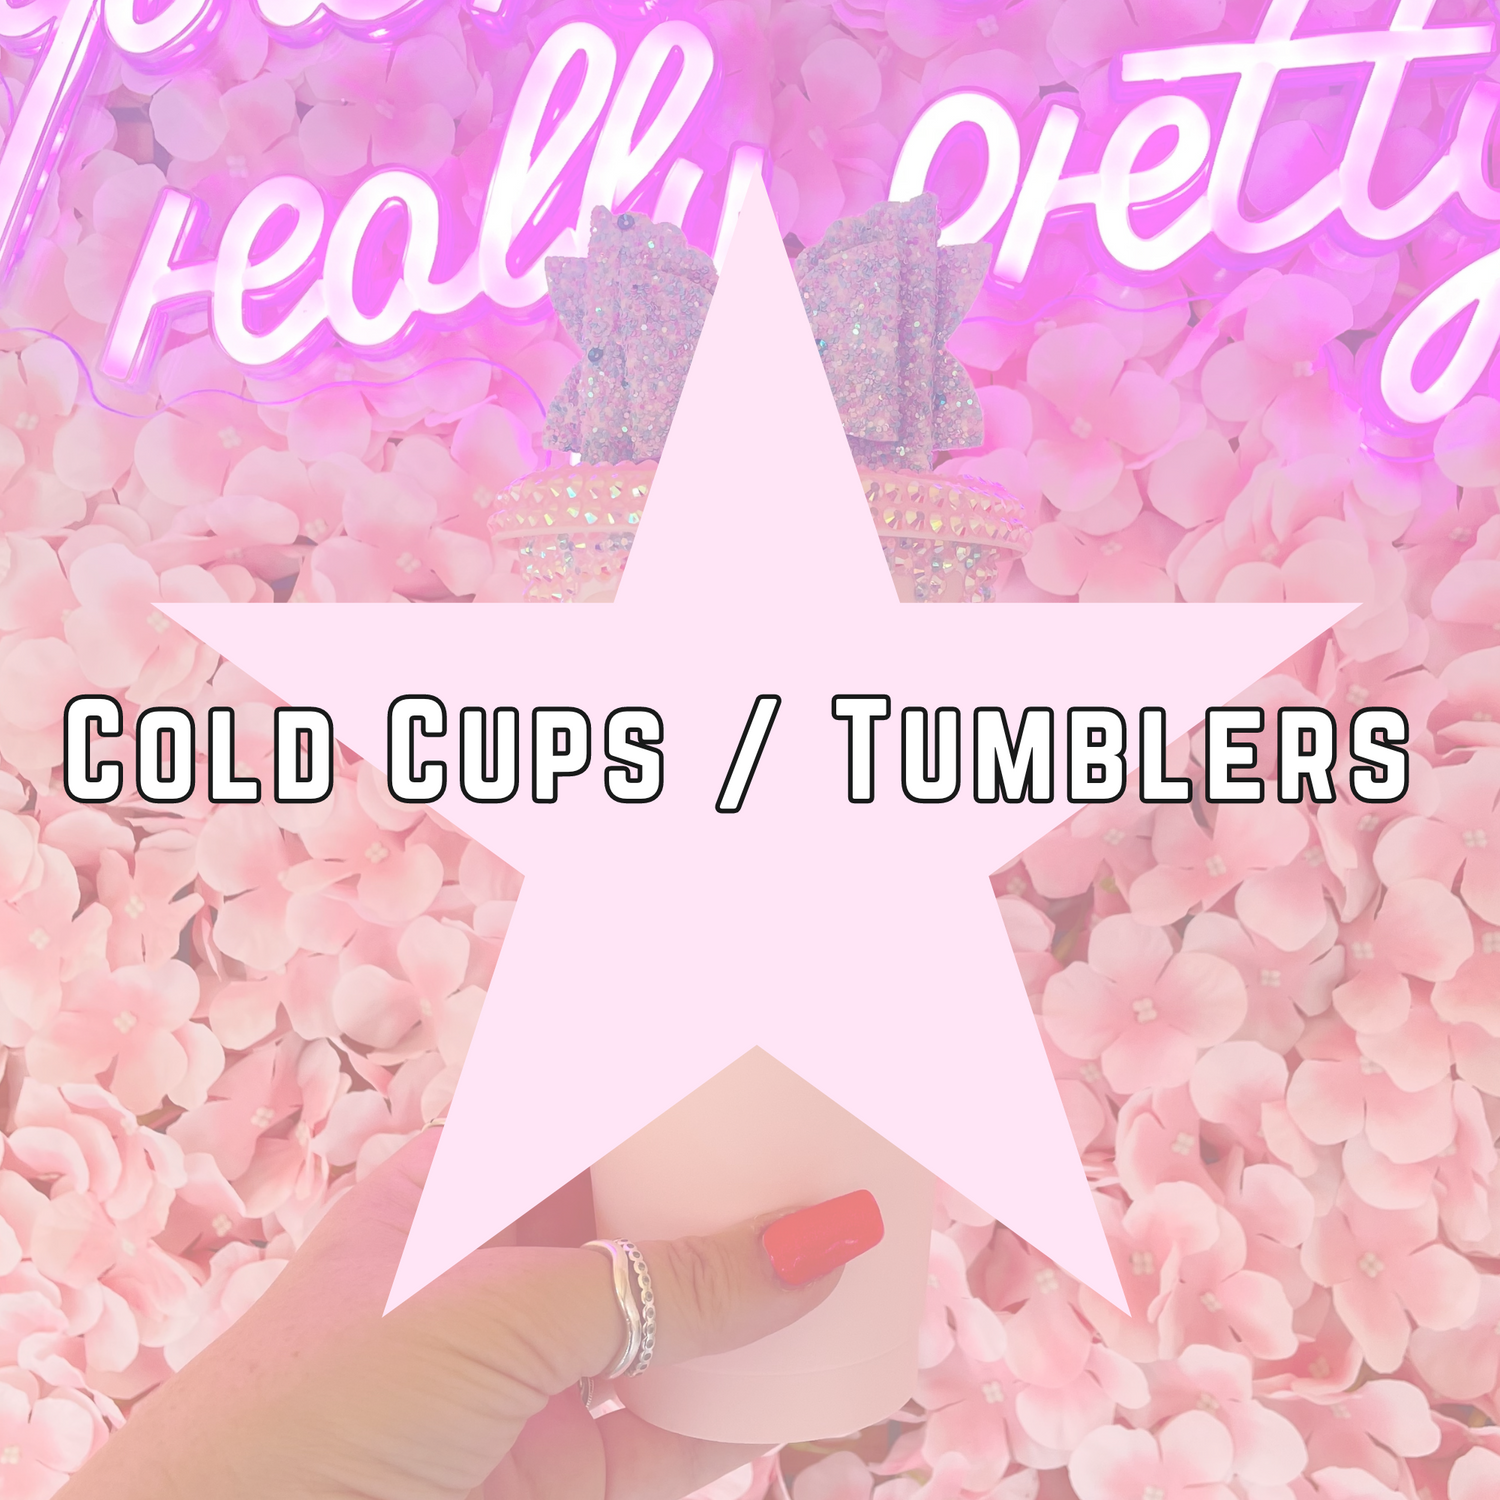 Cold Cups / Tumblers